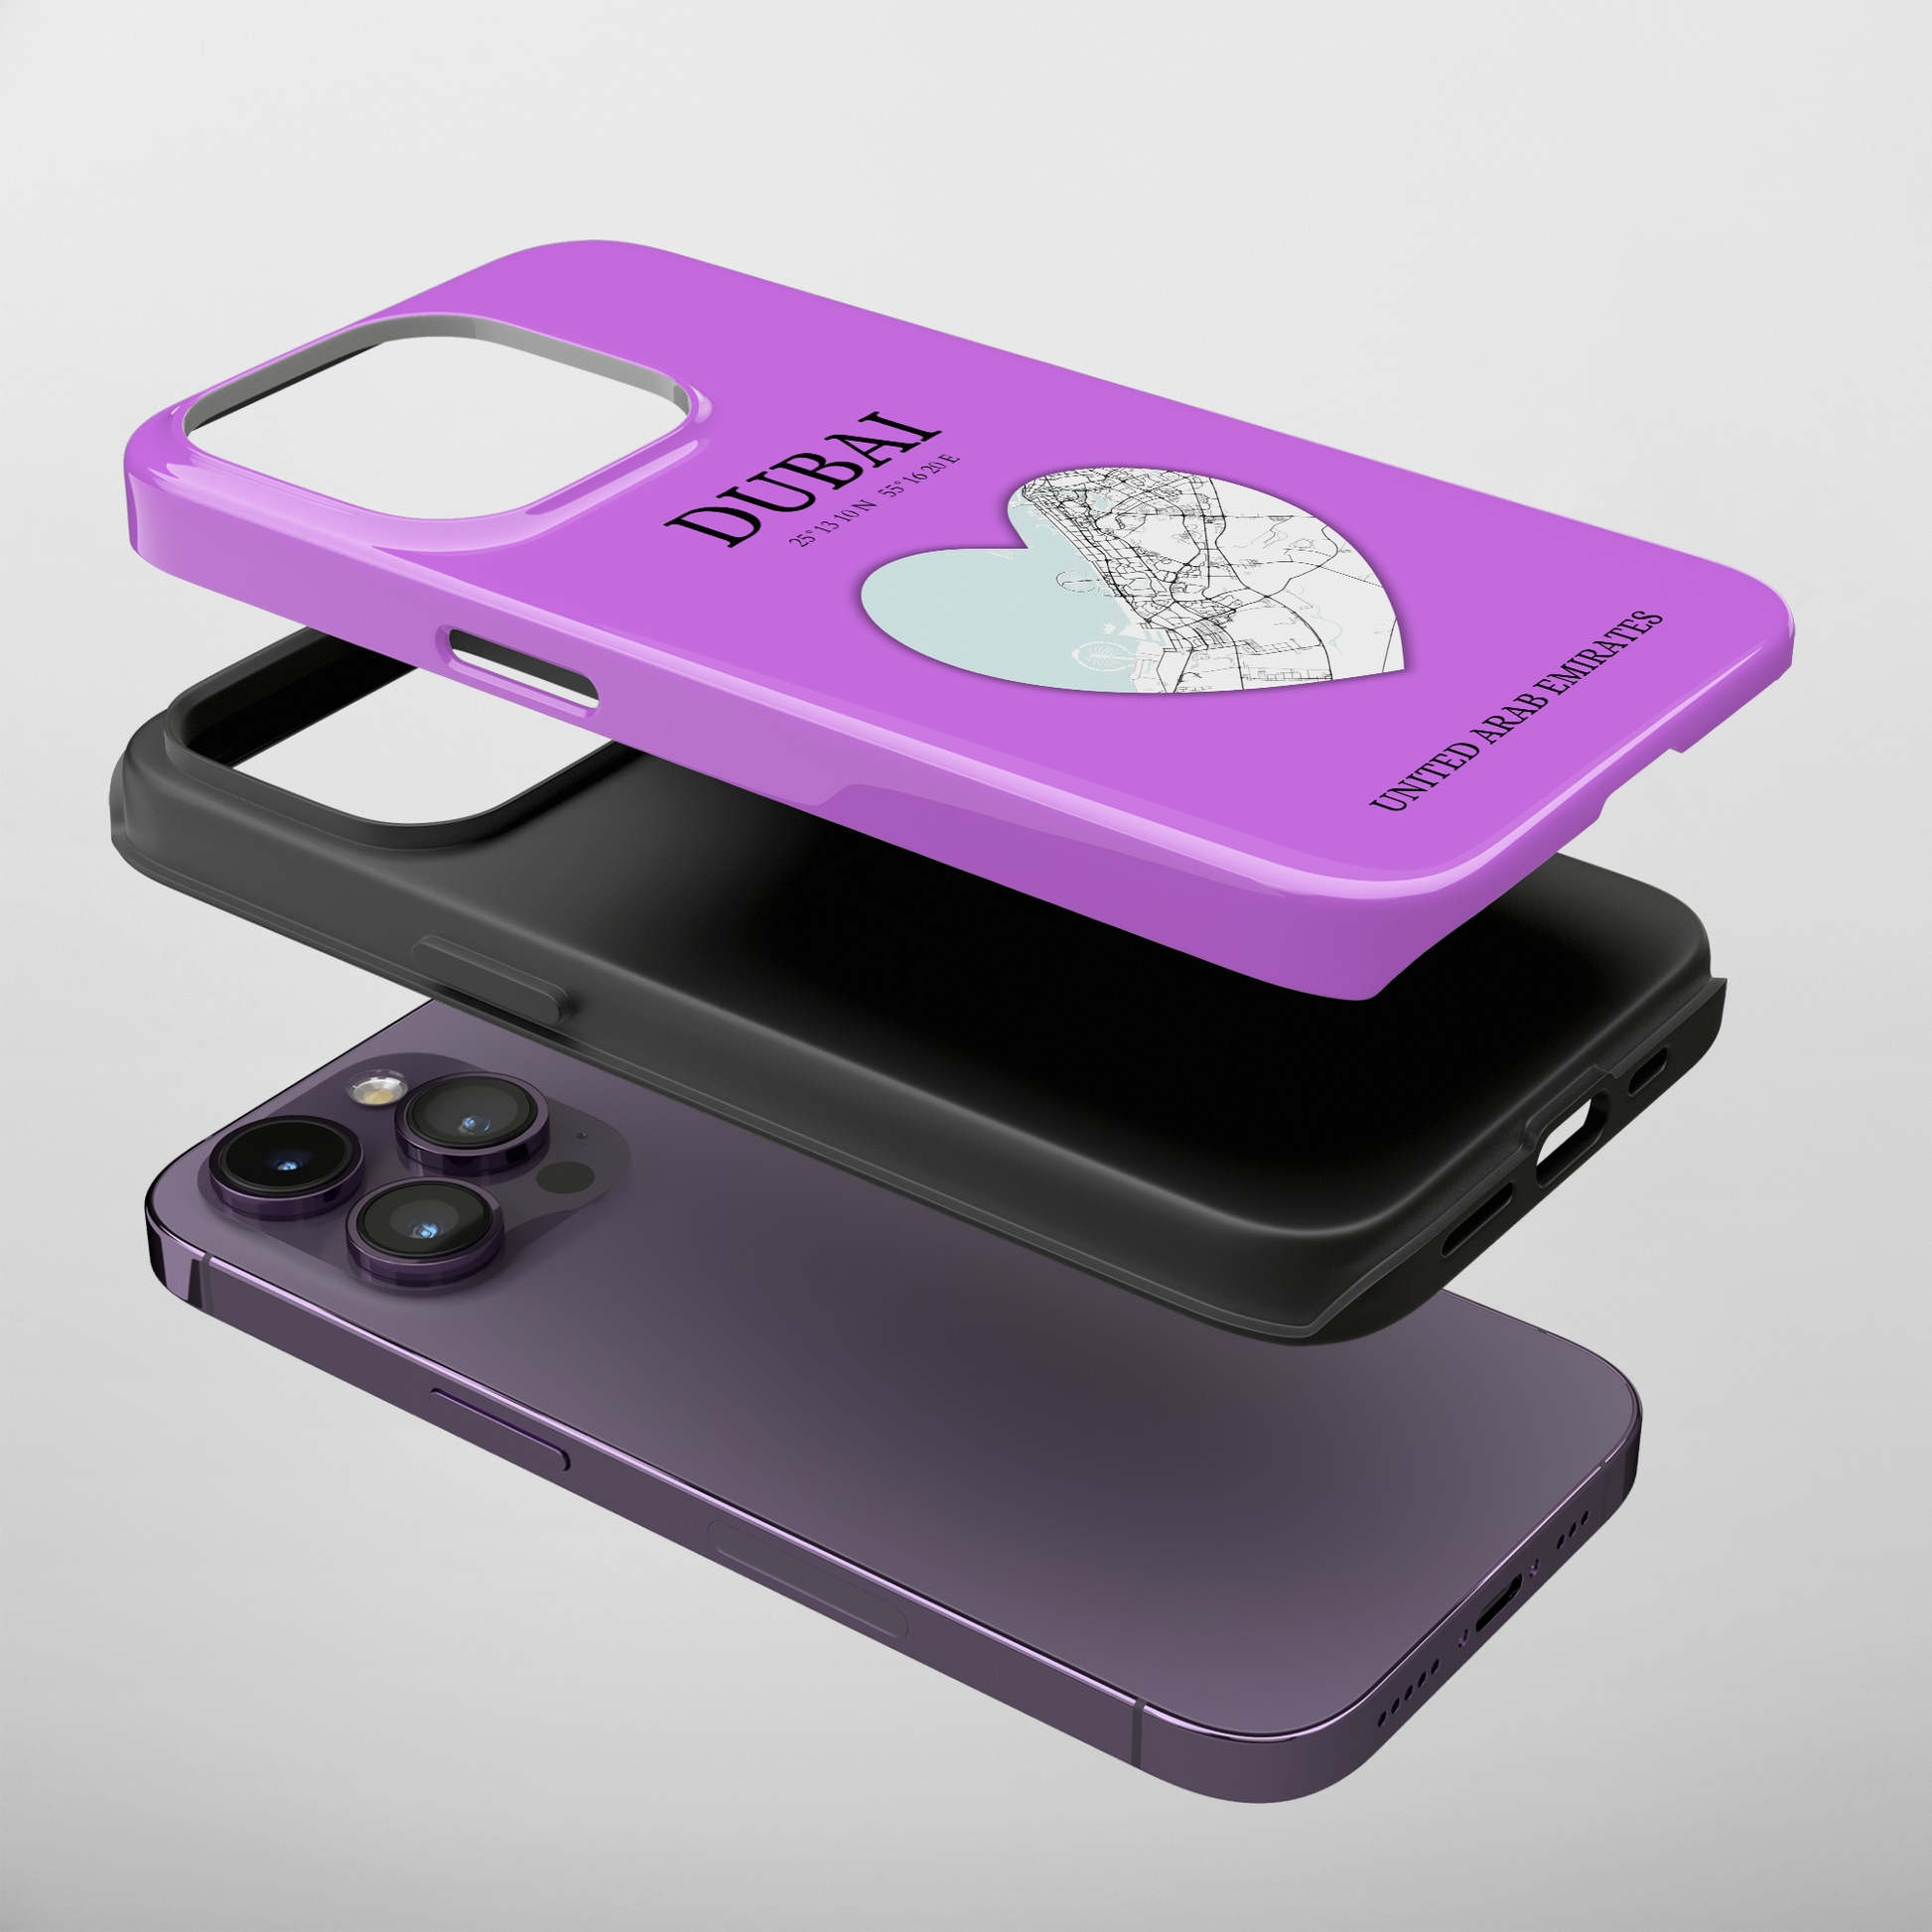 Dubai Heartbeat - Purple (iPhone Case 11-15)Elevate your iPhone with RimaGallery's Dubai York Heartbeat case. Sleek design meets durability for stylish protection. Free US shipping.RimaGallery